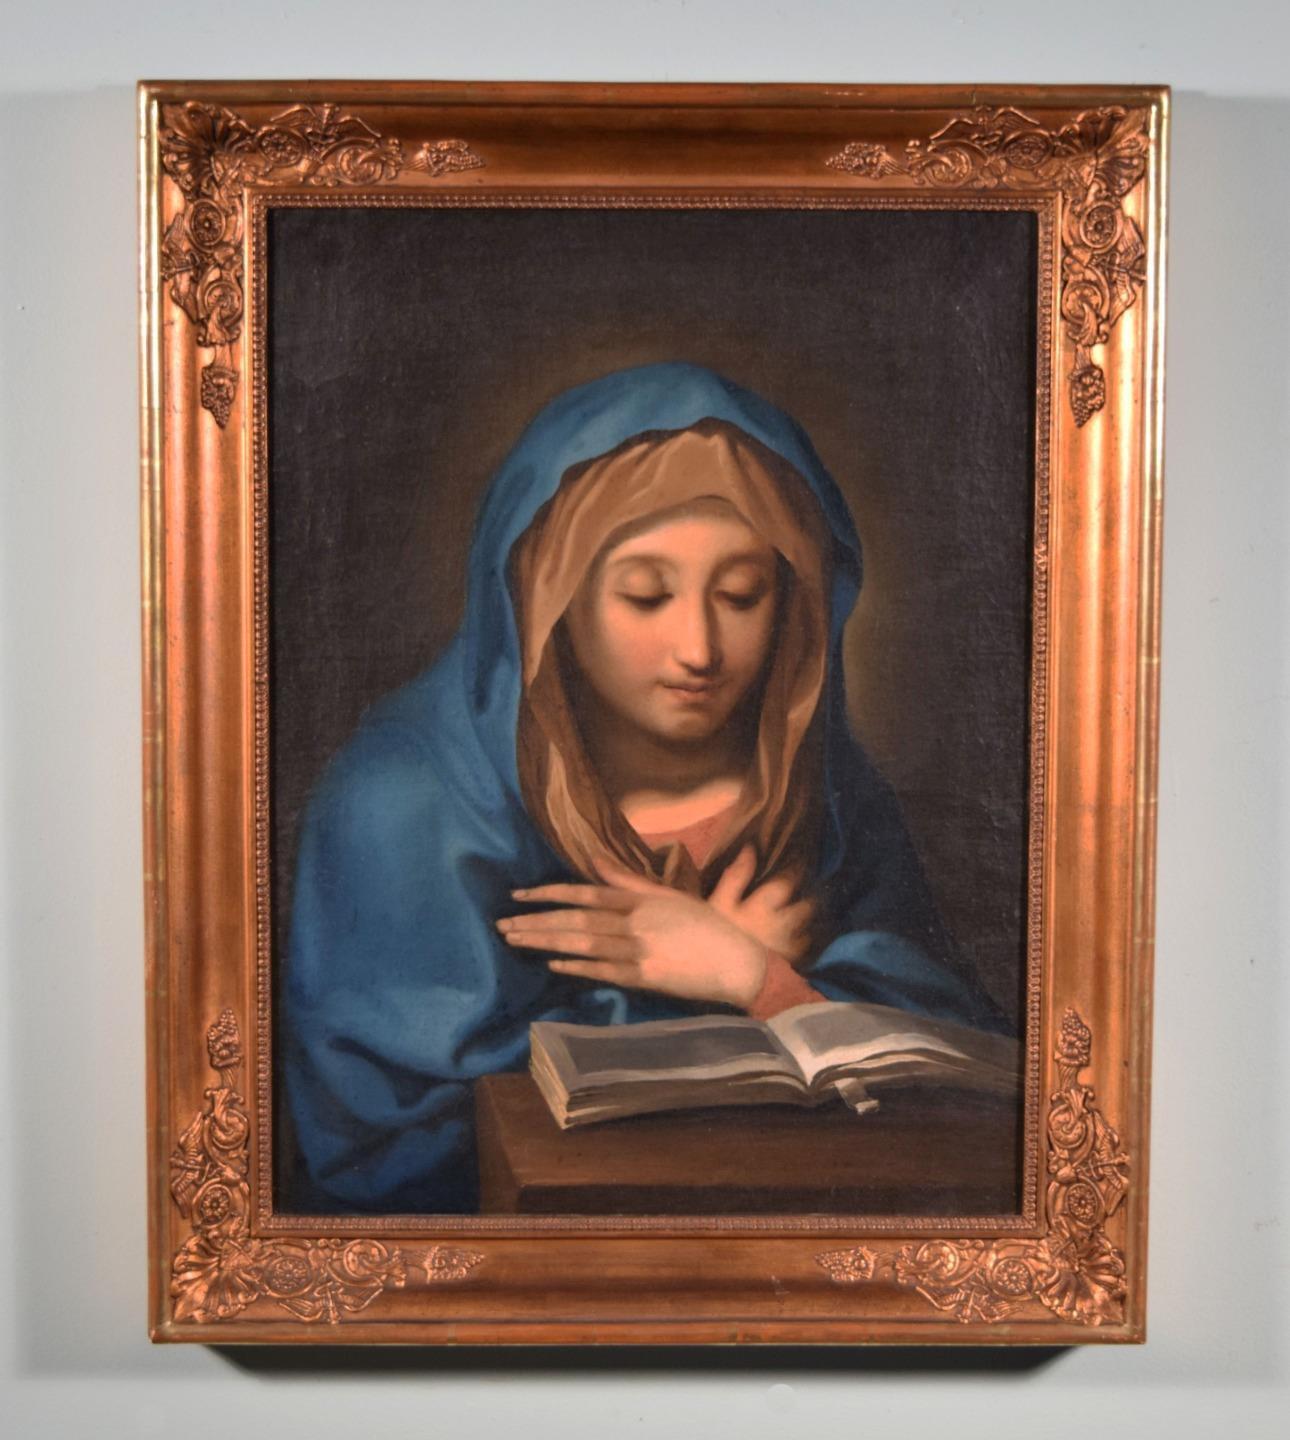 Antique Framed Oil on Canvas Painting of The Virgin Mary Christianity